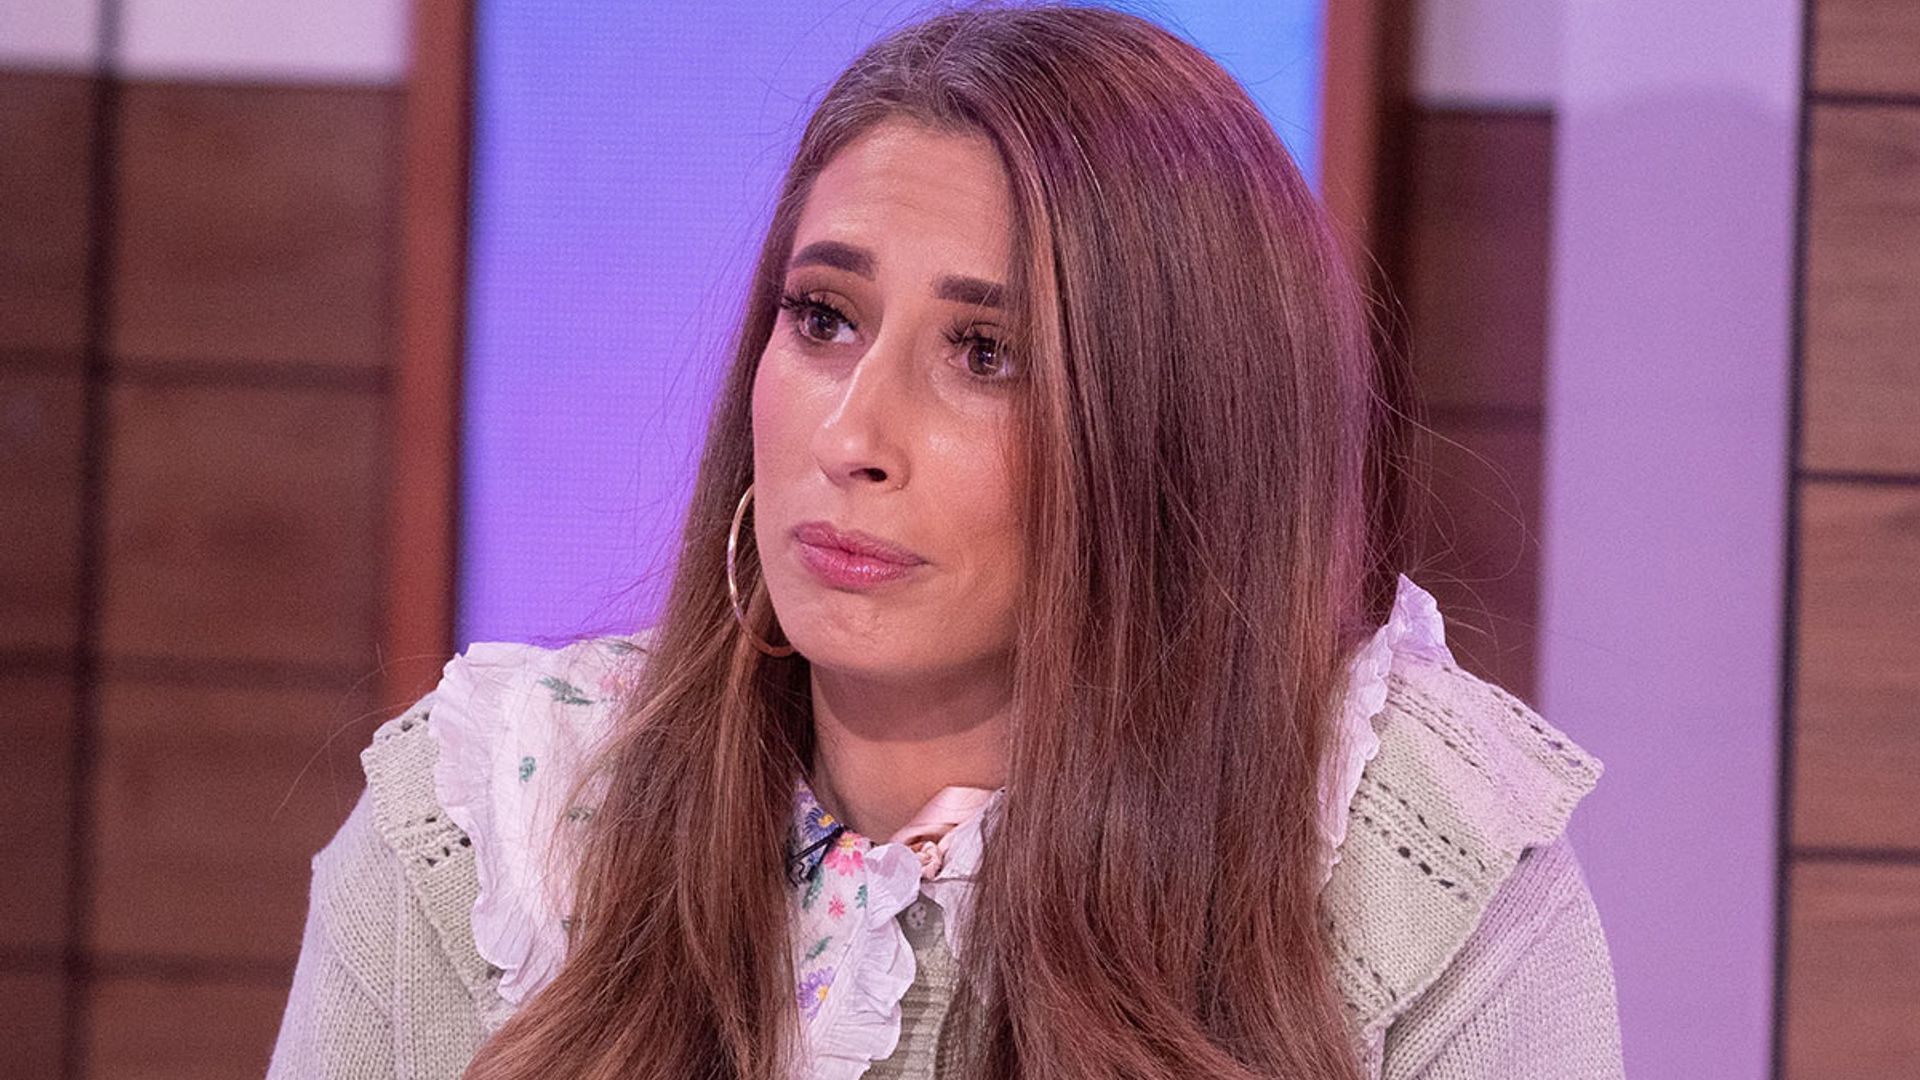 Stacey Solomon opens up about health issue as she returns to social media